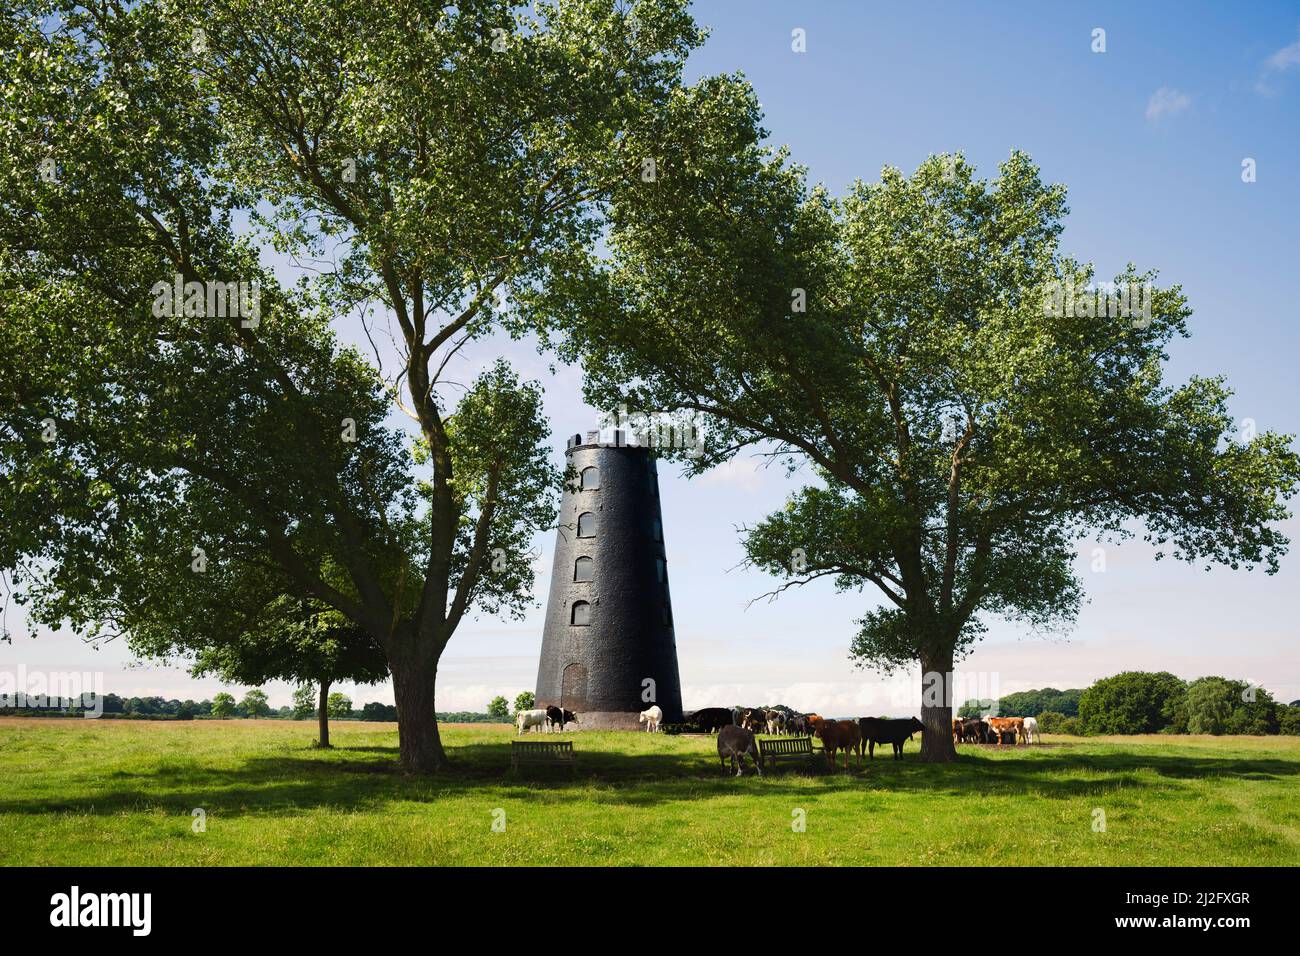 Black mill, a disused windmill, flanked by trees and cattle peacefully grazing on green pasture under bright blue sky in summer in Beverley, UK. Stock Photo